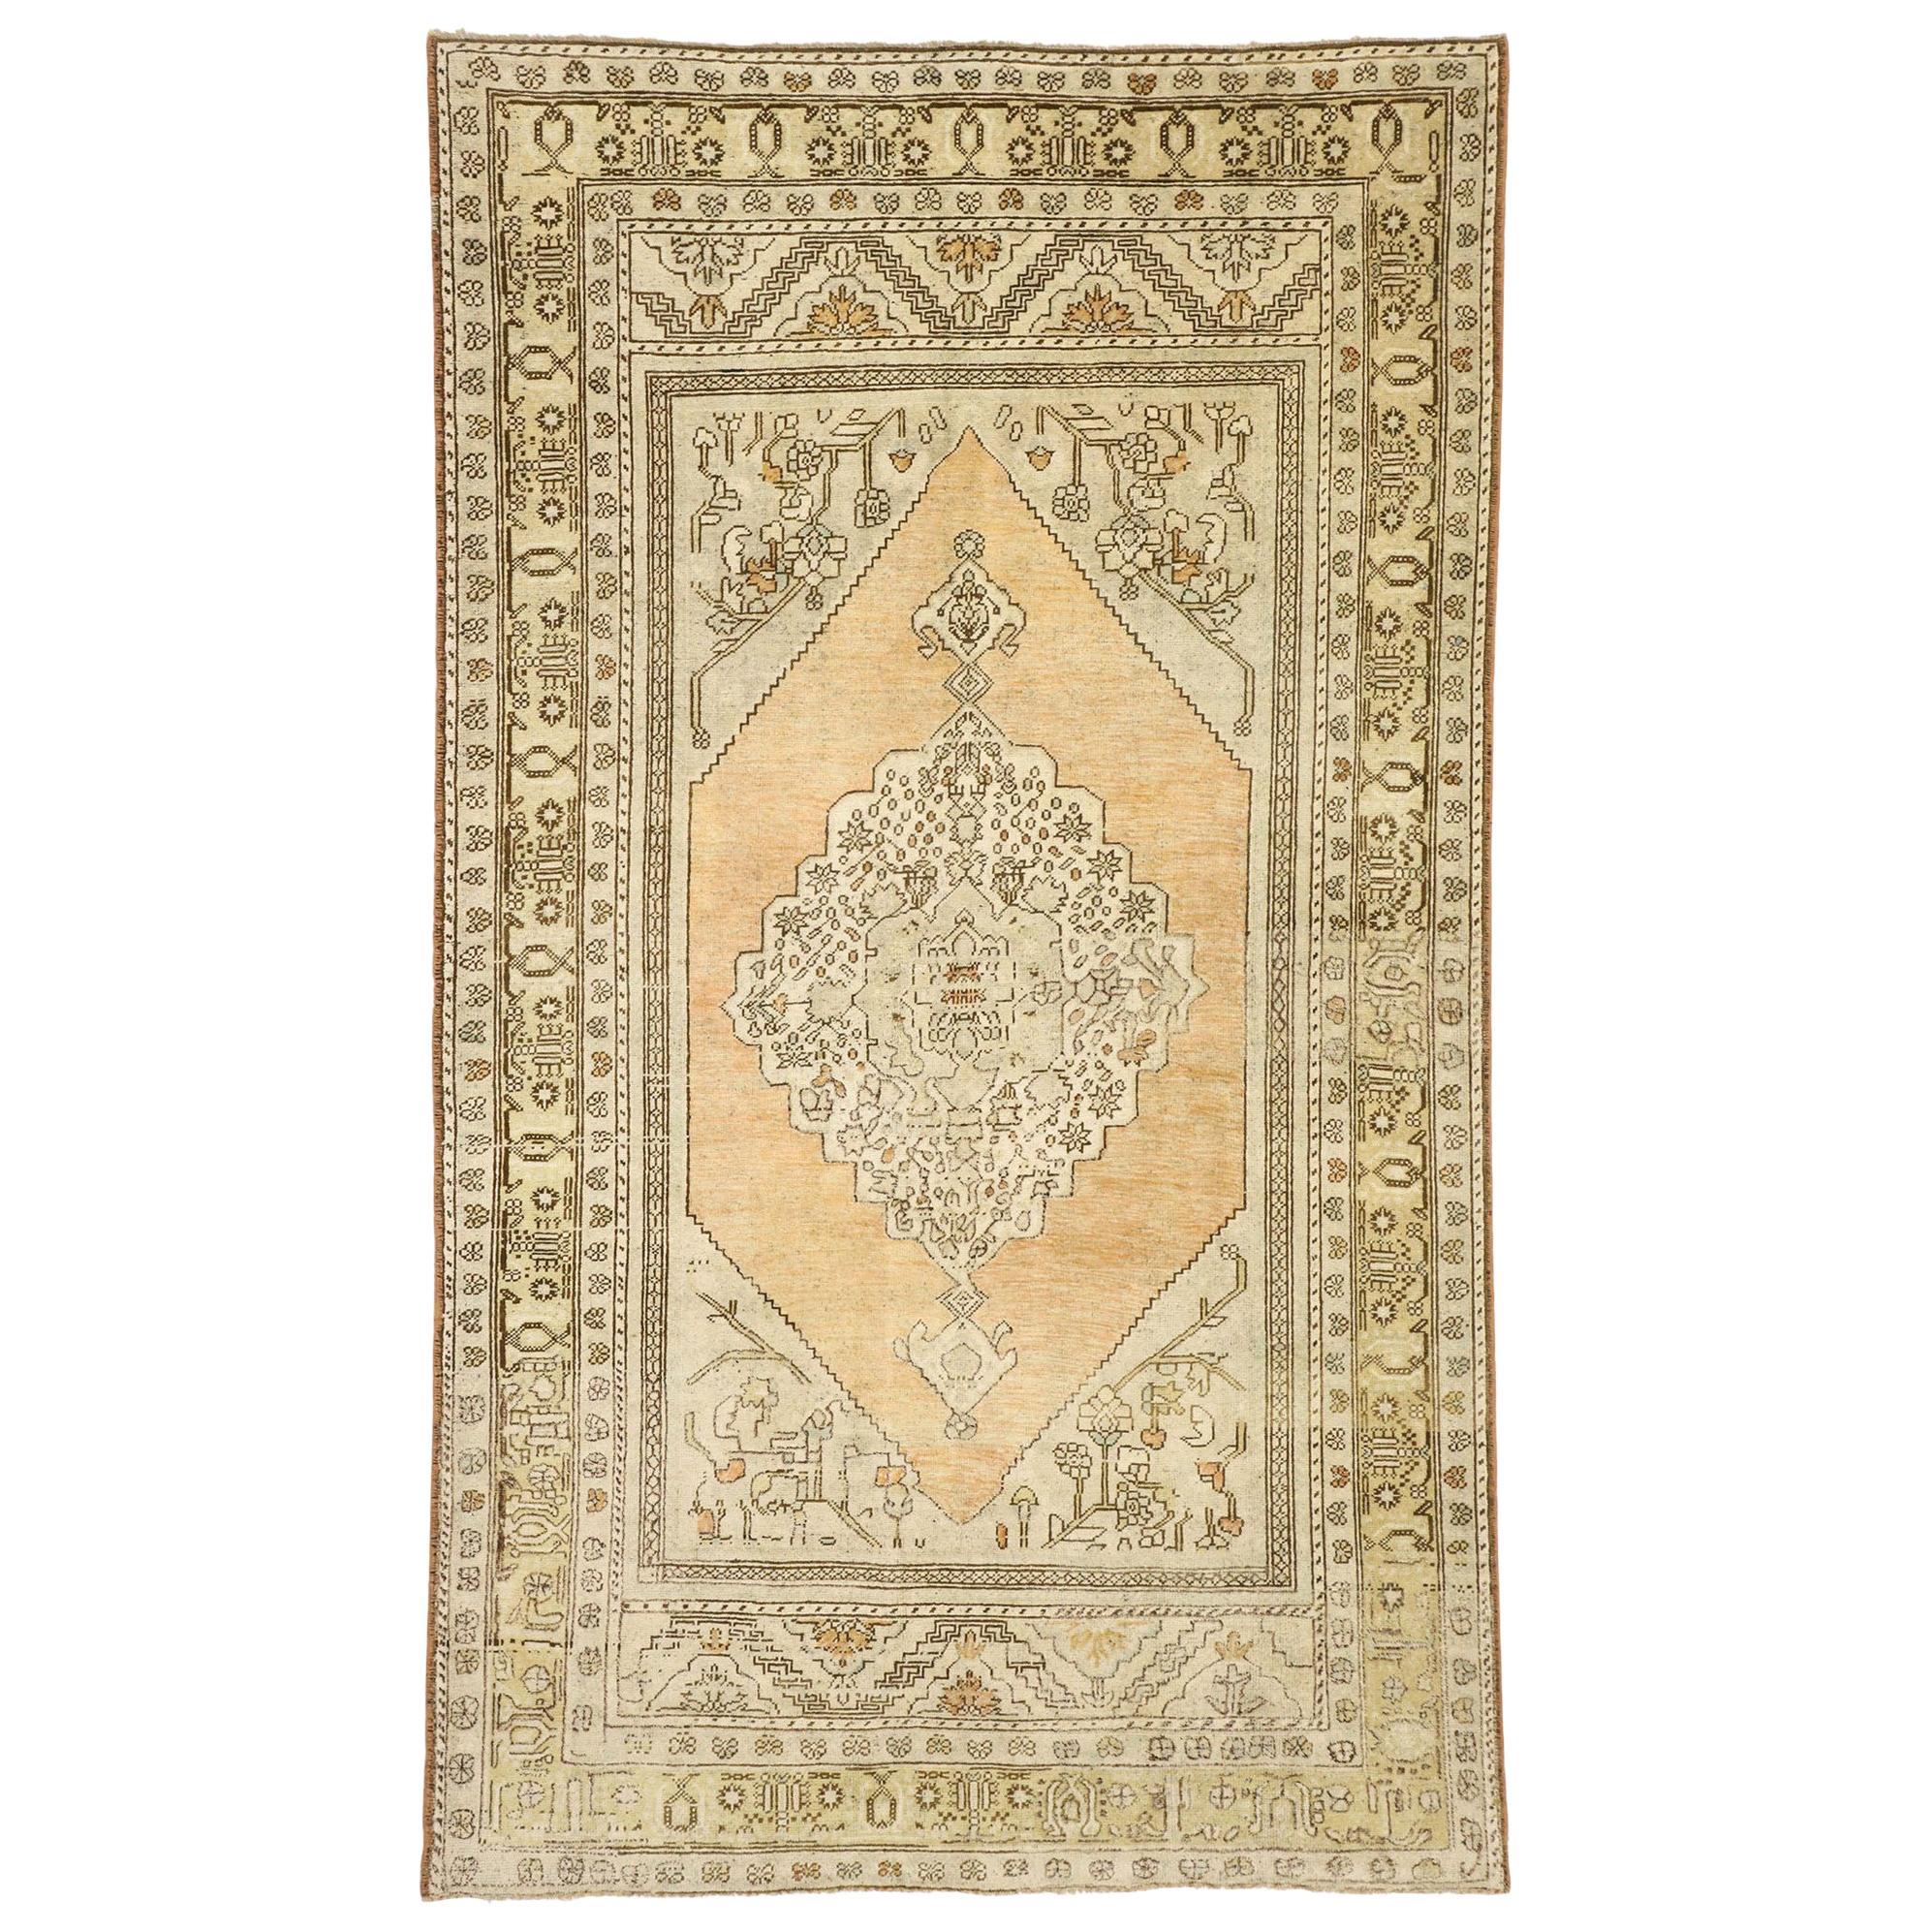 Vintage Turkish Oushak Rug with Shaker Style and Soft, Subtle Colors